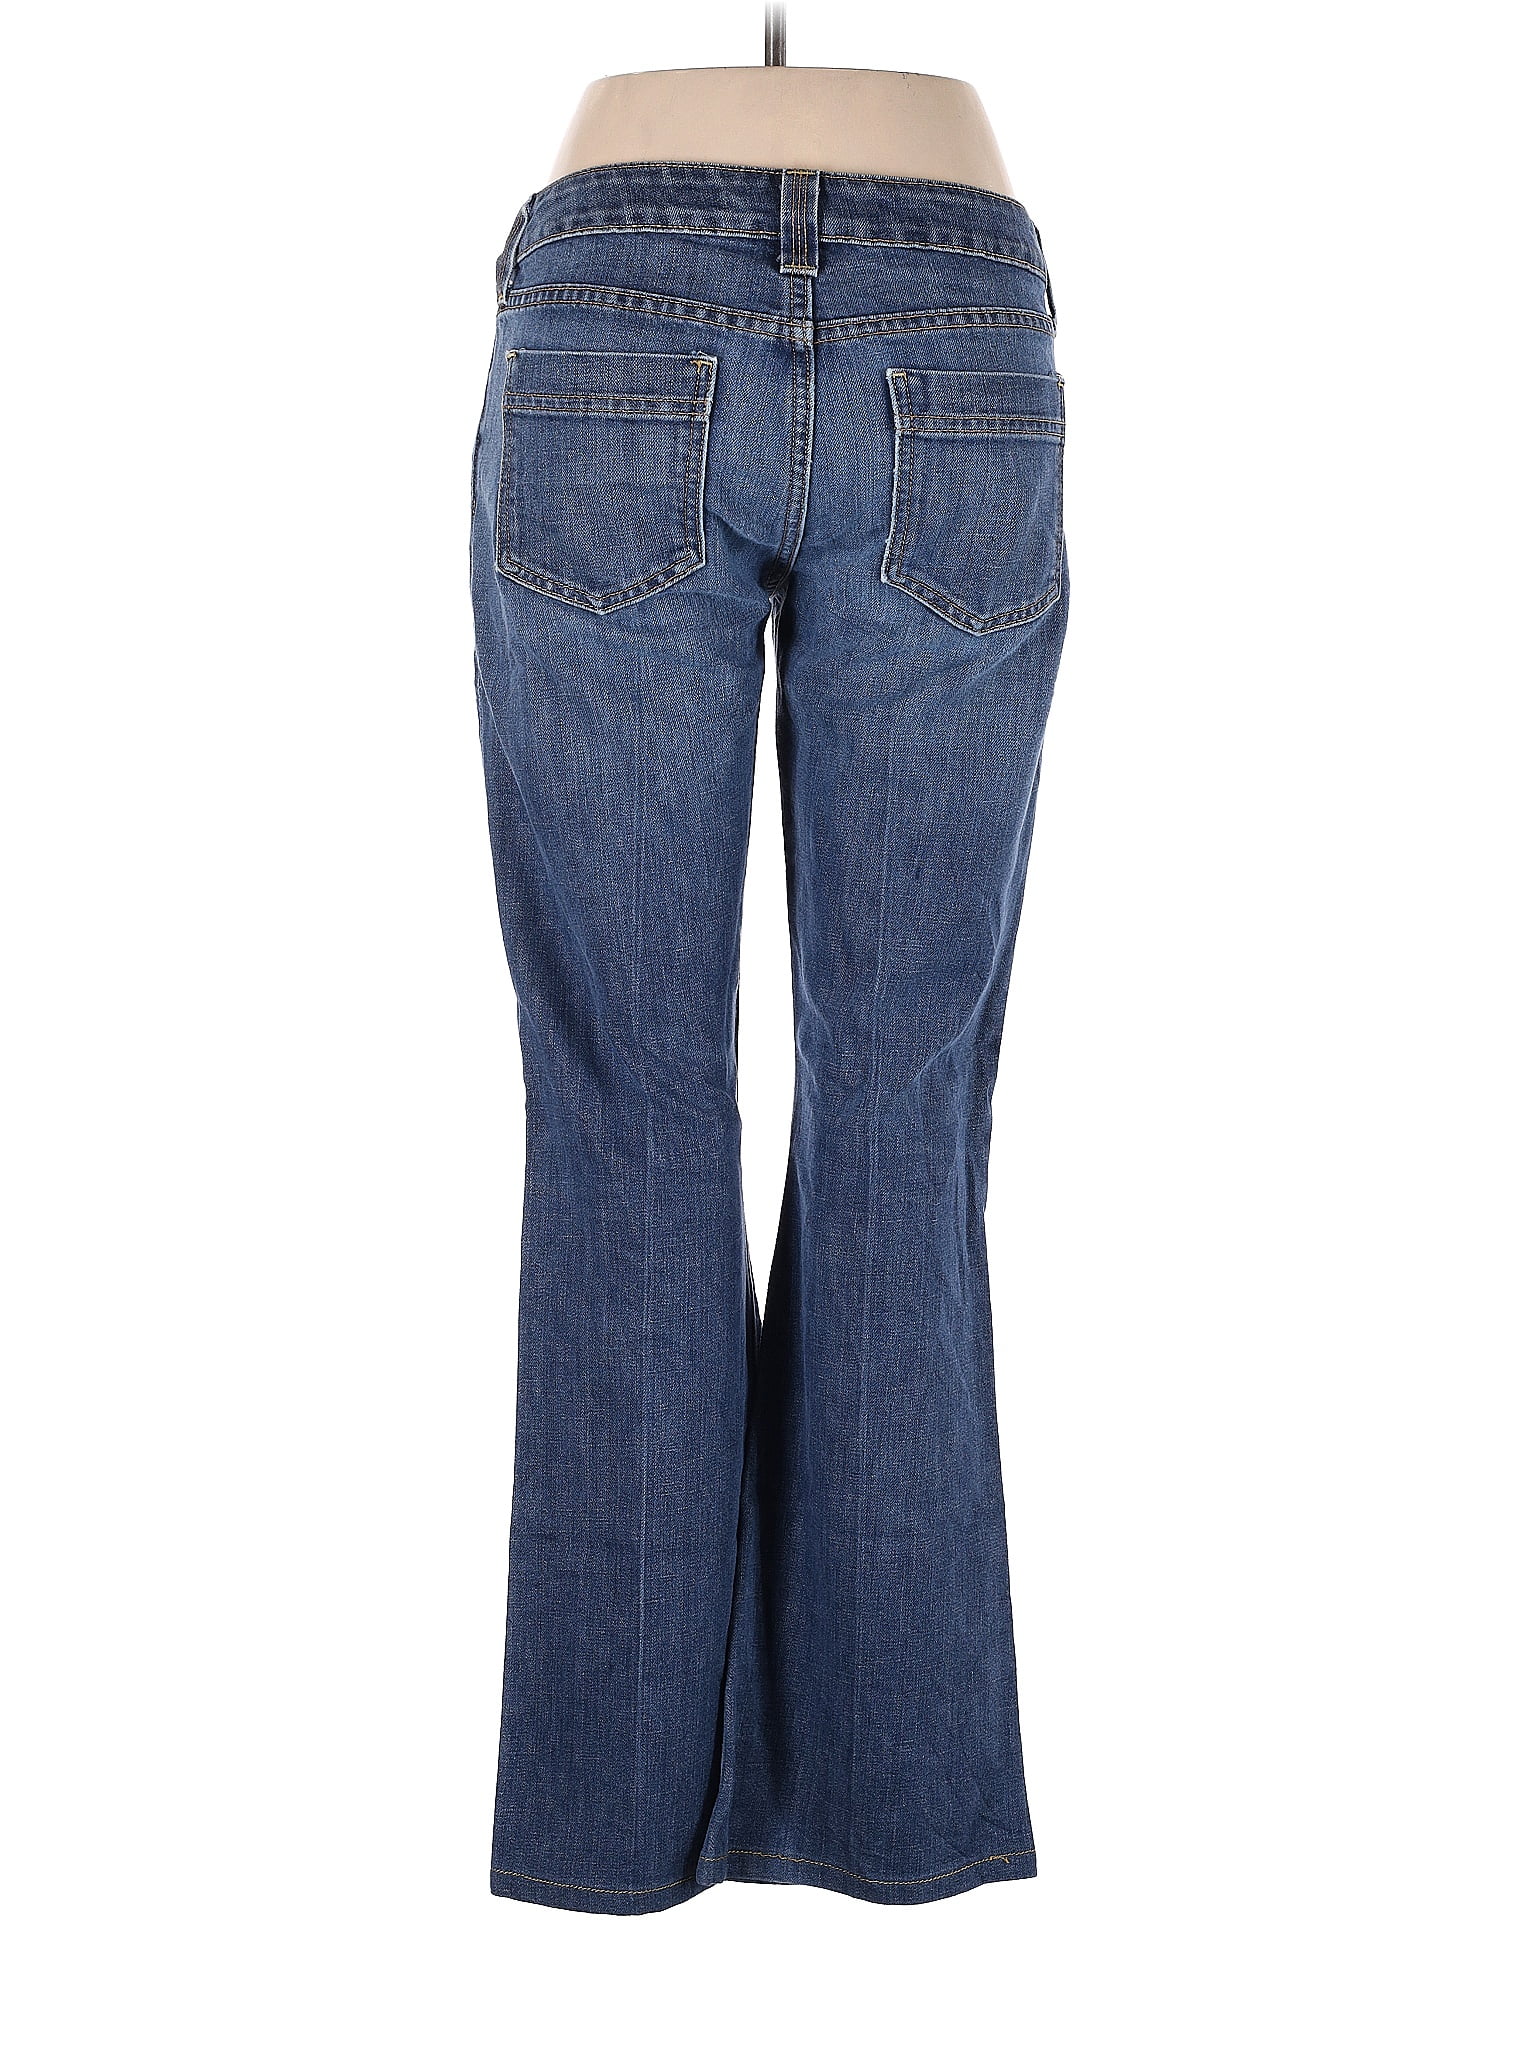 Gap Solid Blue Jeans Size XL (Estimated) - 80% off